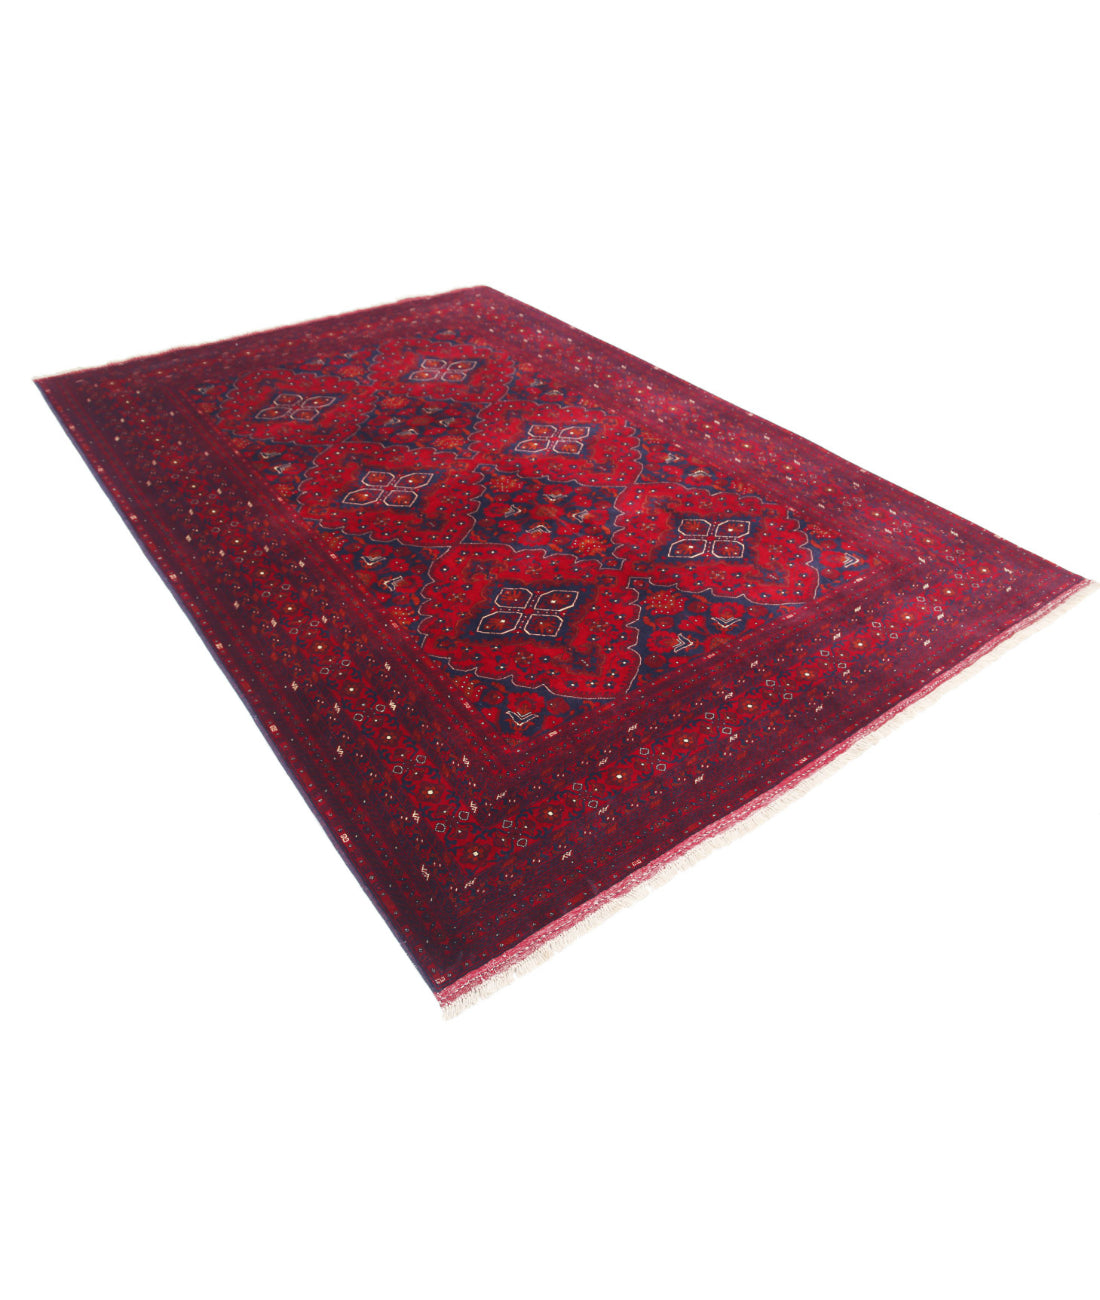 Hand Knotted Afghan Beljik Wool Rug - 6'8'' x 9'8'' 6'8'' x 9'8'' (200 X 290) / Red / Red